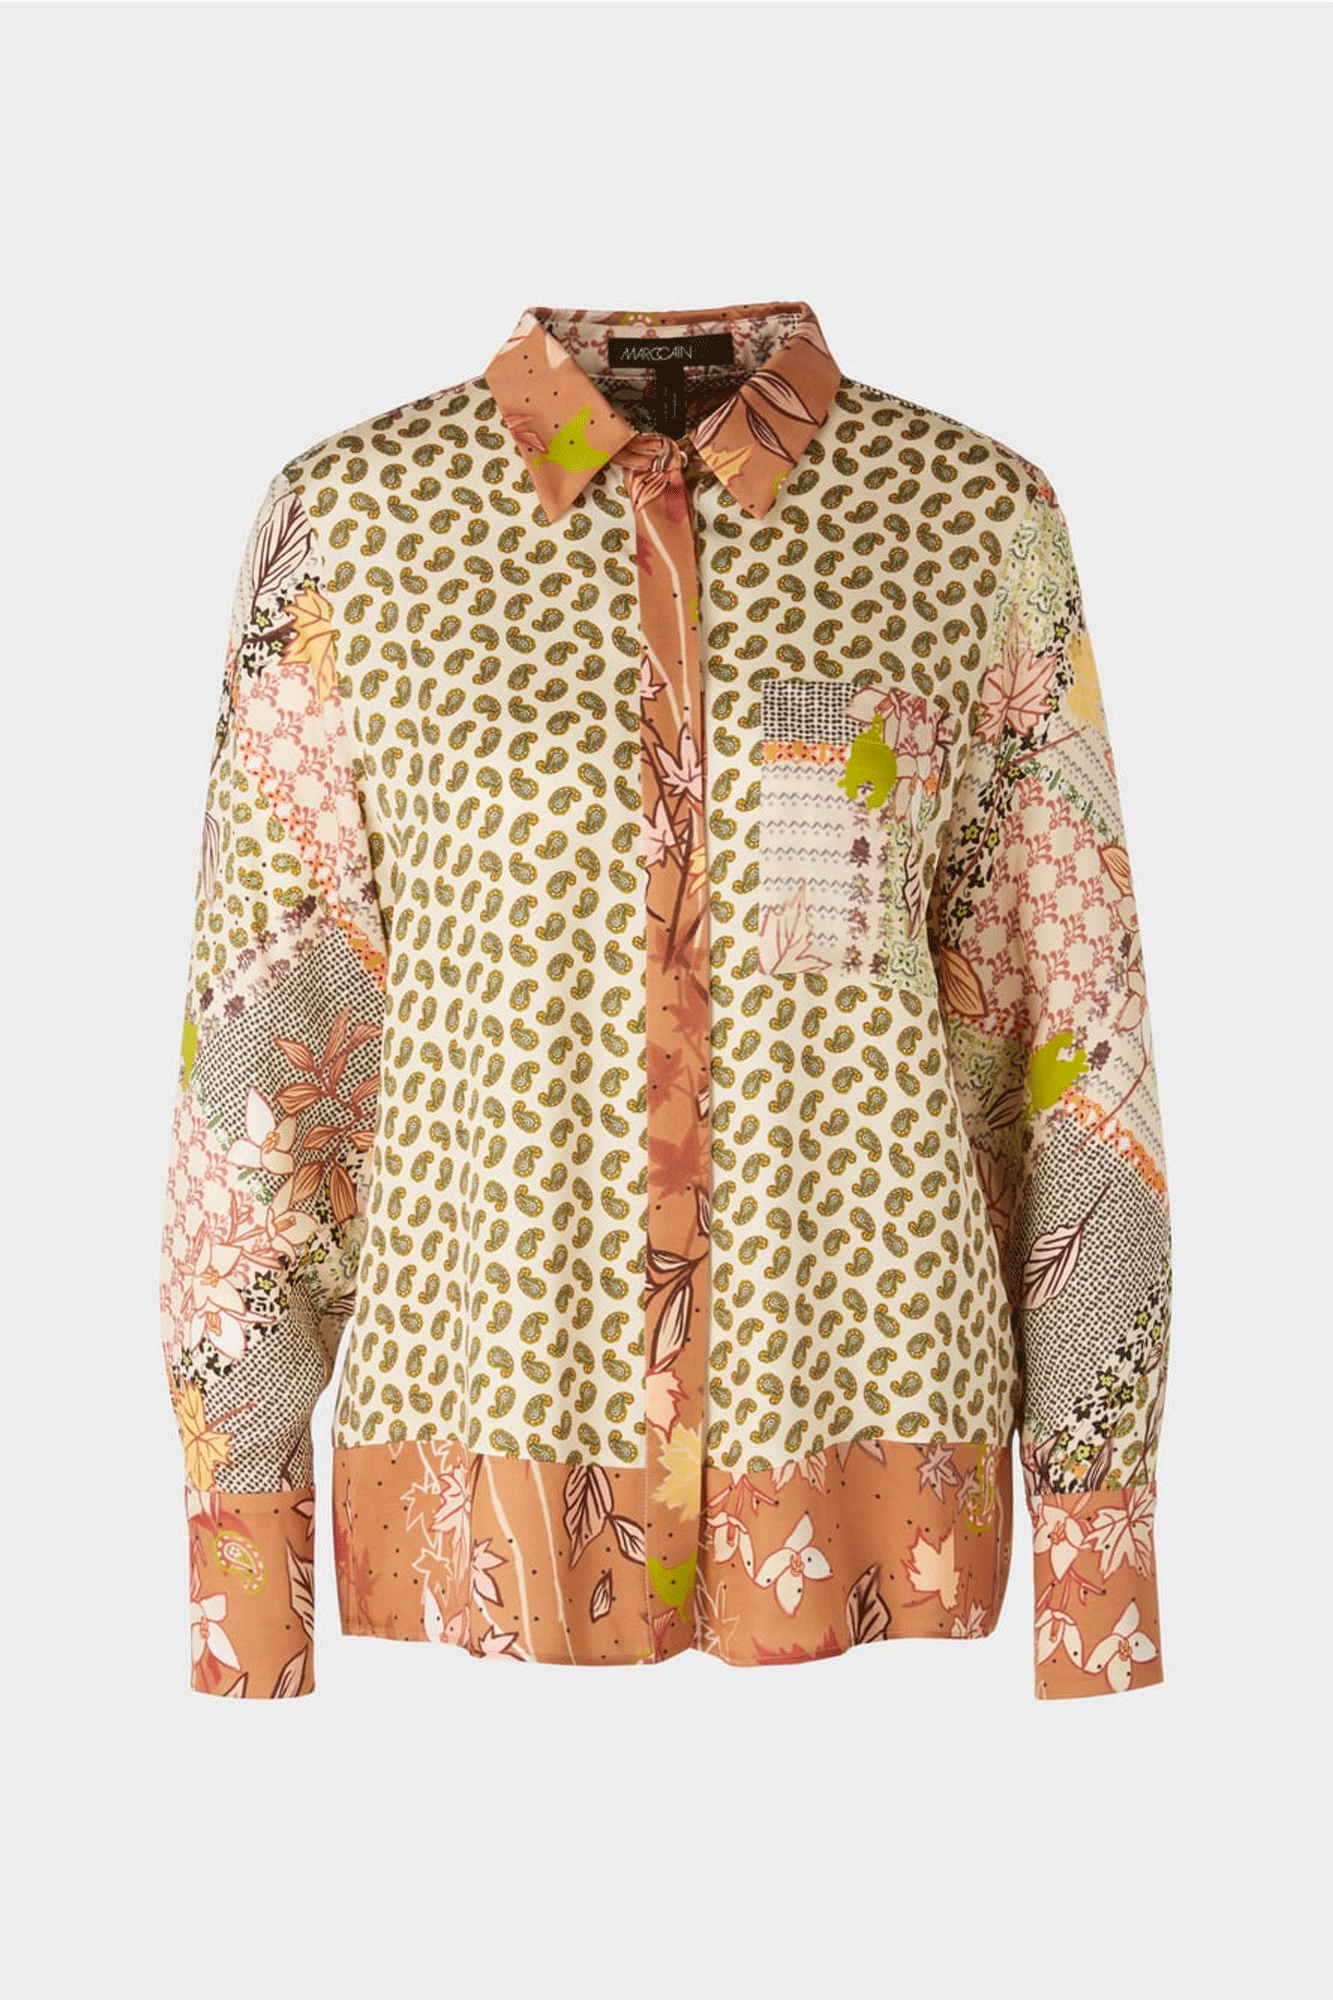 This classic blouse is designed with wide blouse cut and pleasant viscose fabric for all-day comfort. Featuring a colourful print, a button placket and collar, a patch breast pocket, and cuff sleeves with metal buttons, this blouse is sure to become a wardrobe staple.